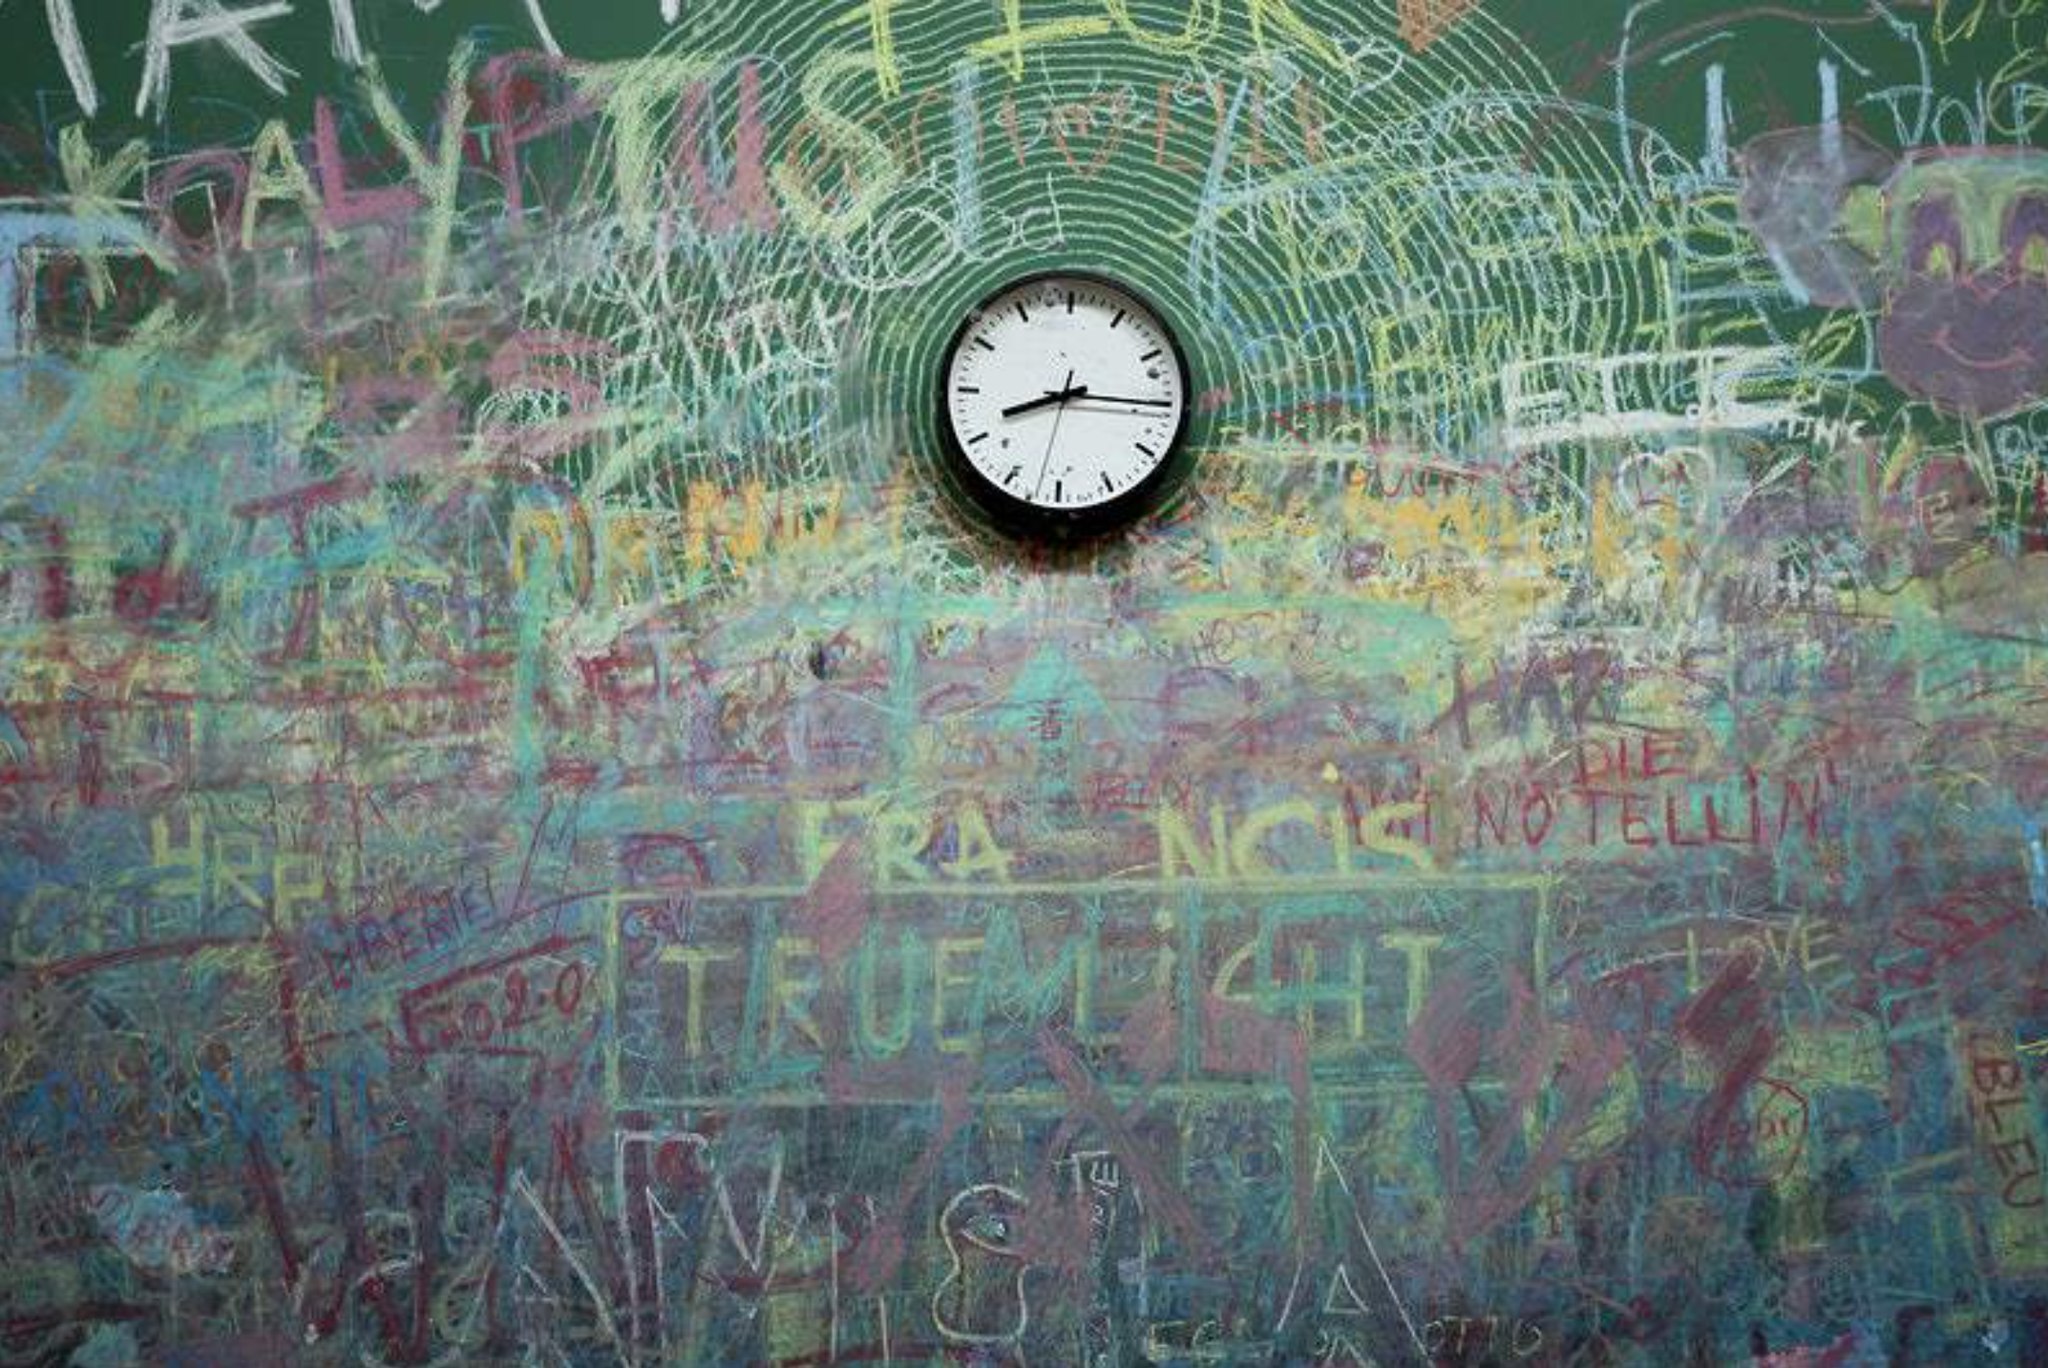 Chalkboard wall with colorful writings and clock